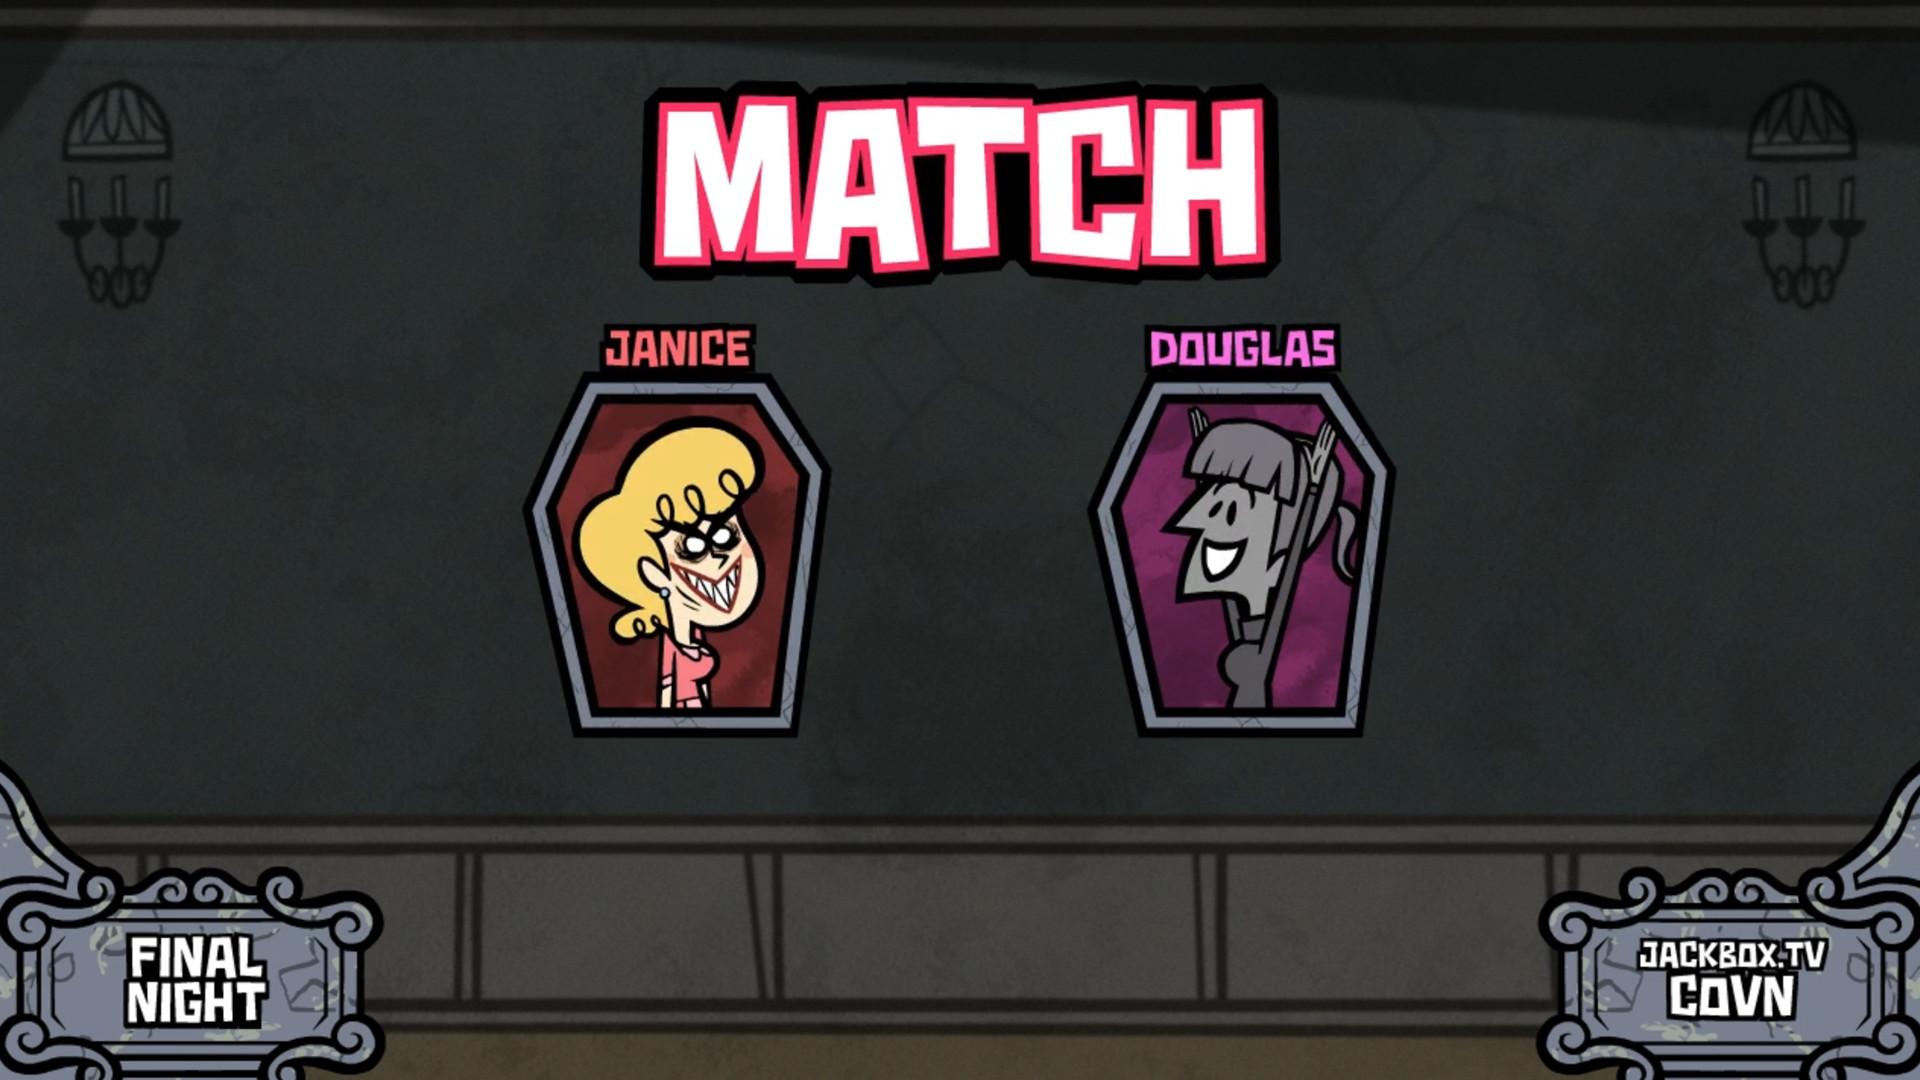 Screenshot №15 from game The Jackbox Party Pack 4